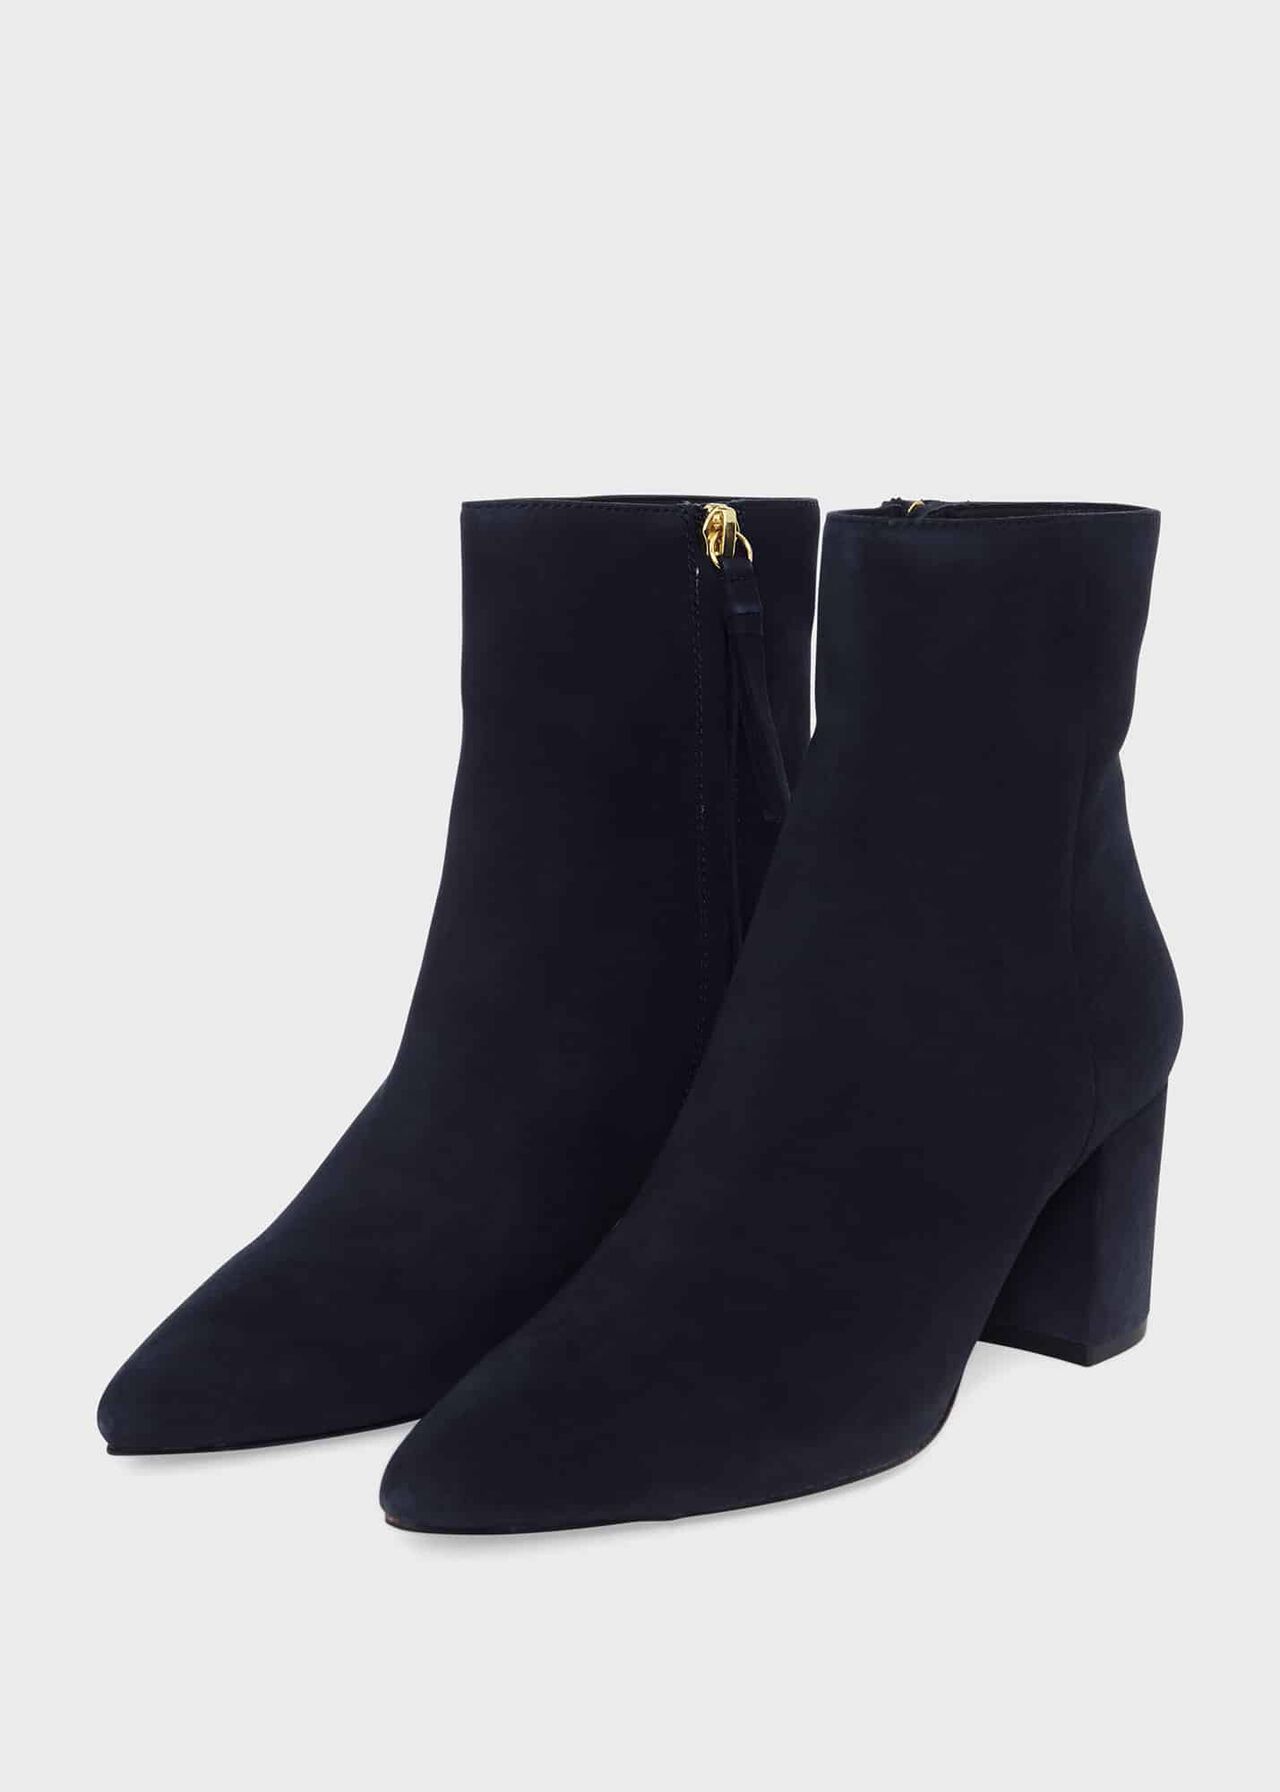 Lyra Ankle Boots, Navy, hi-res